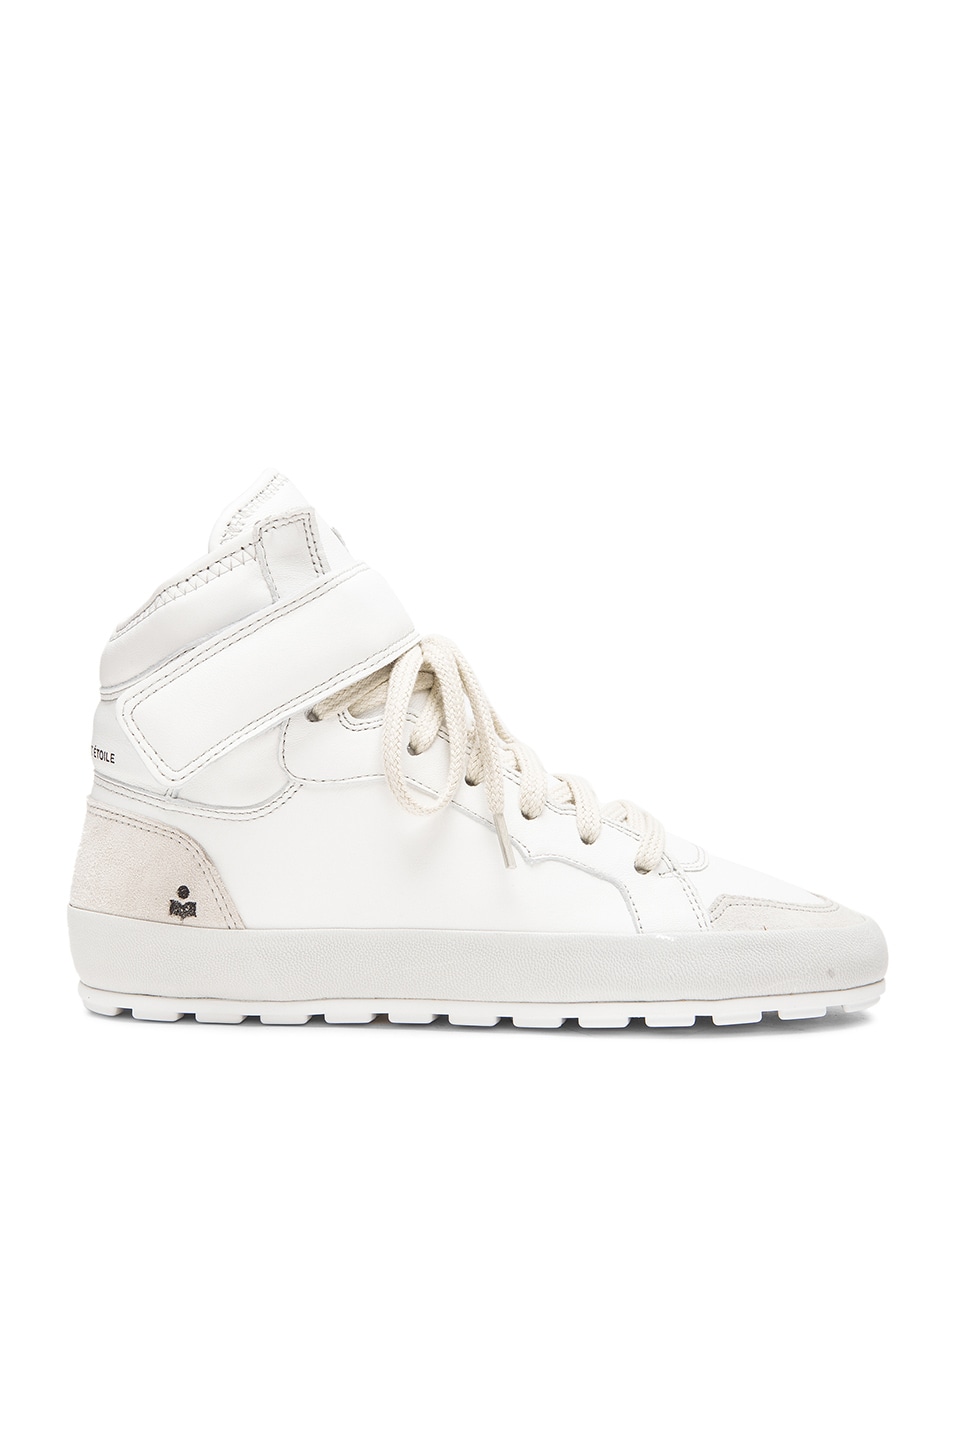 Image 1 of Isabel Marant Etoile Bessy Hip Hop Leather Sneakers in White